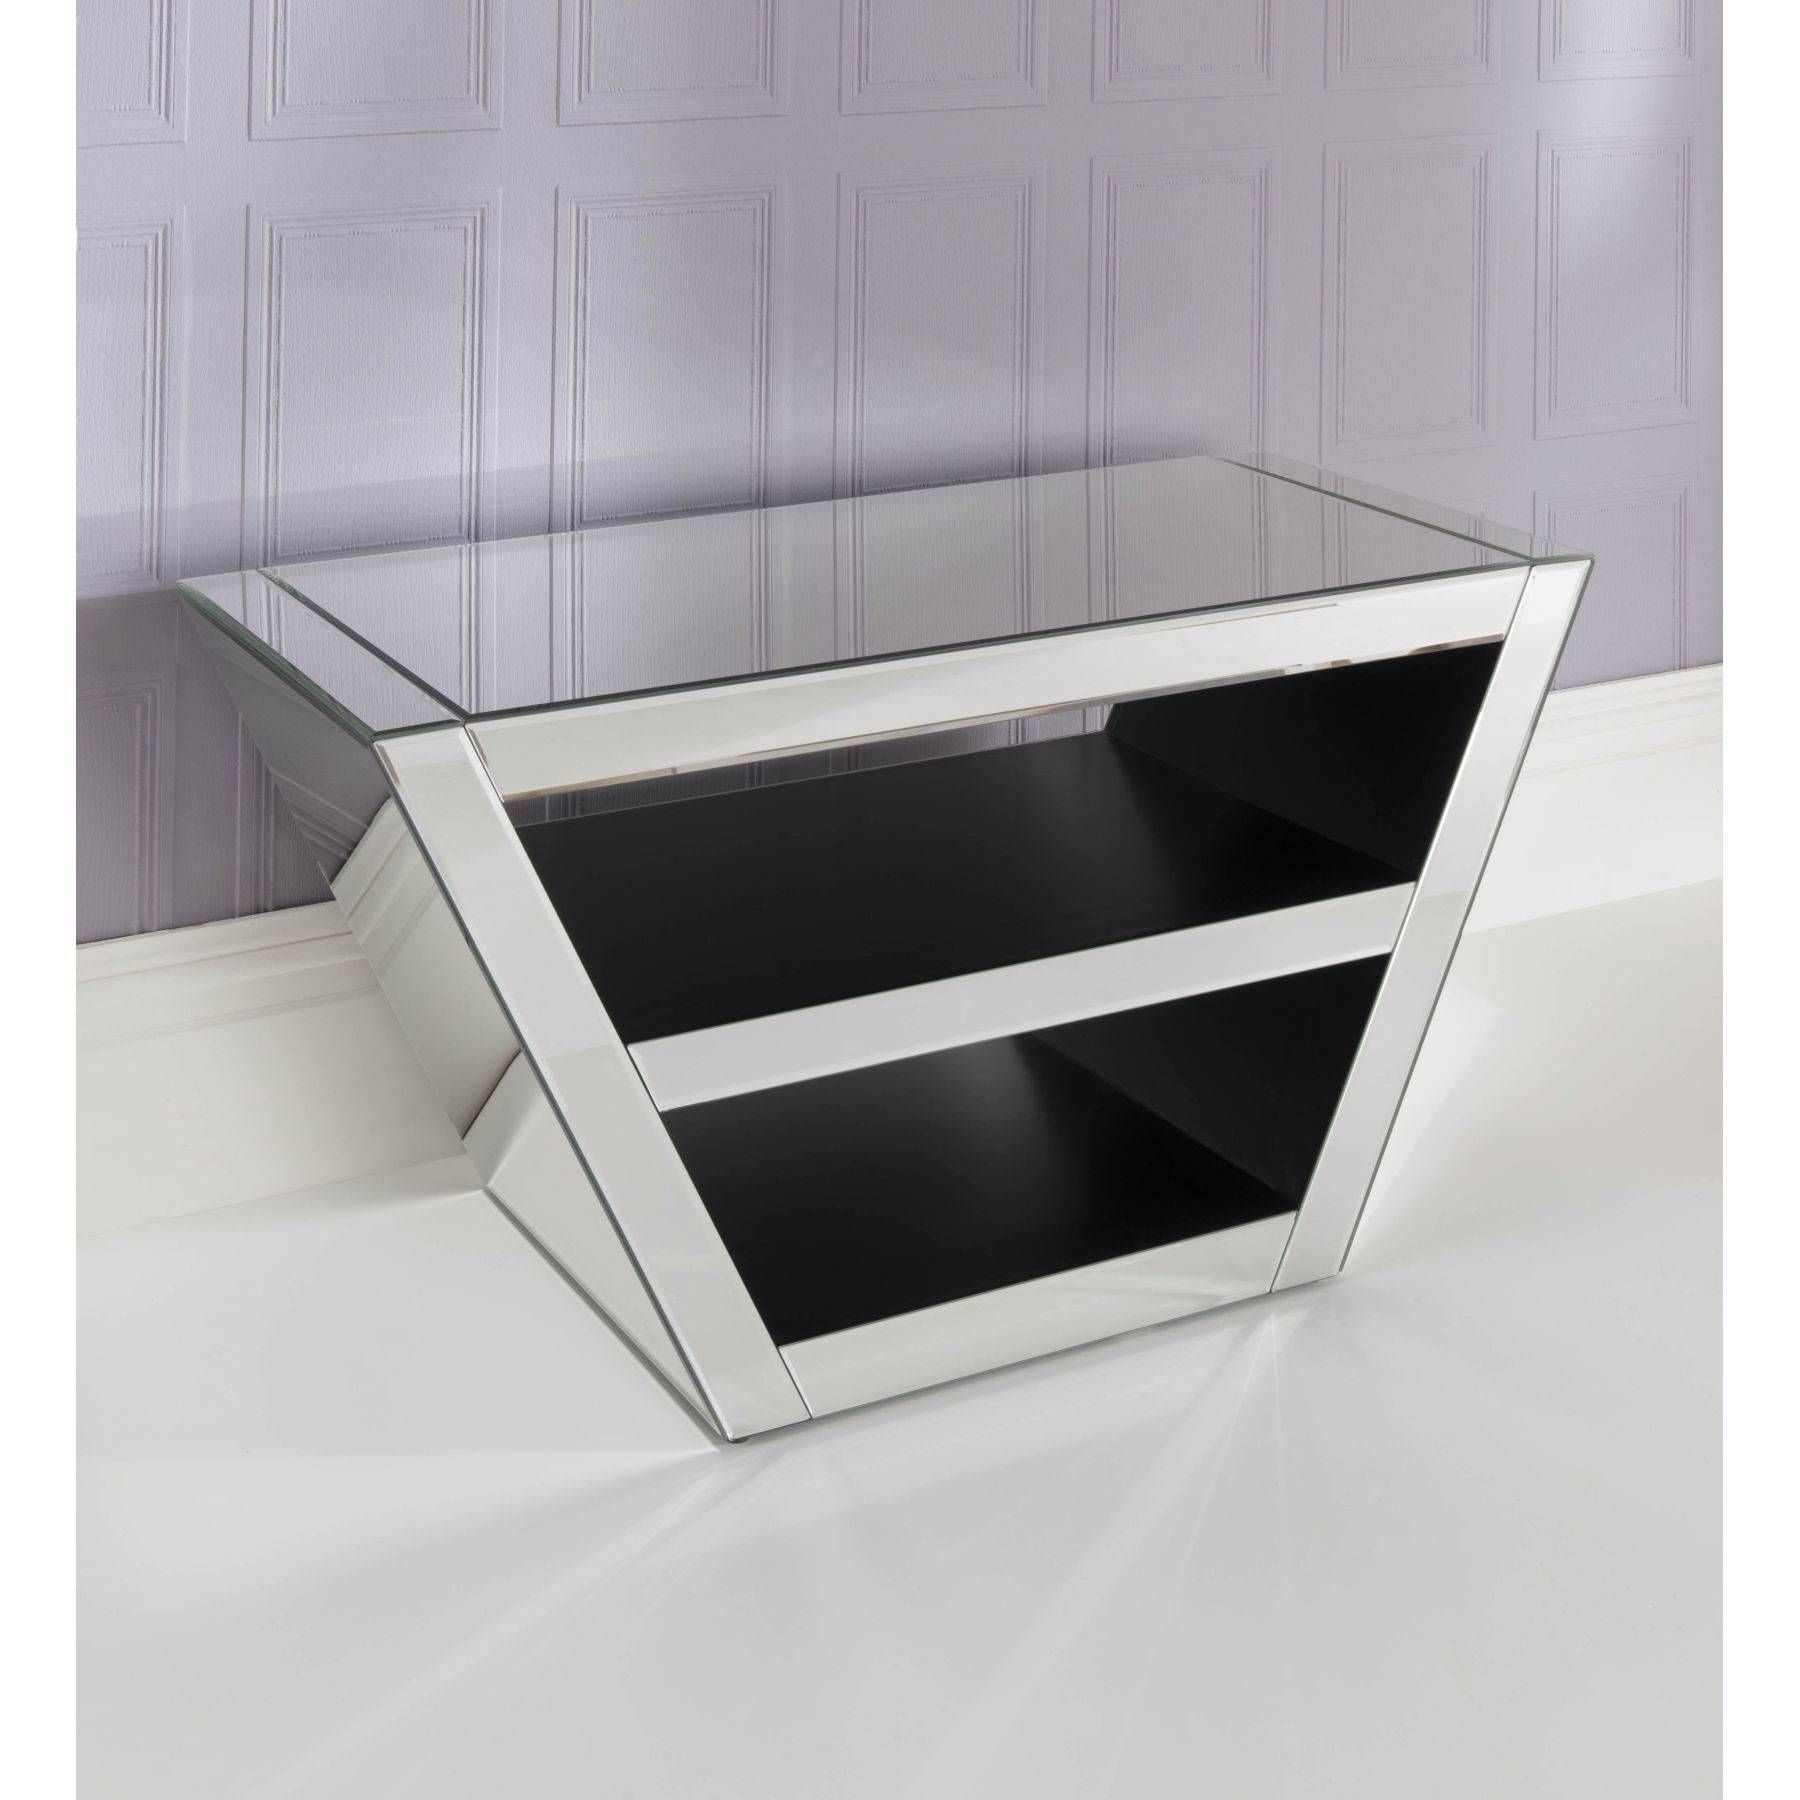 Mirrored Tv Cabinet | Venetian Glass Tv Stand | Homesdirect365 For Glass Tv Cabinets With Doors (View 15 of 15)